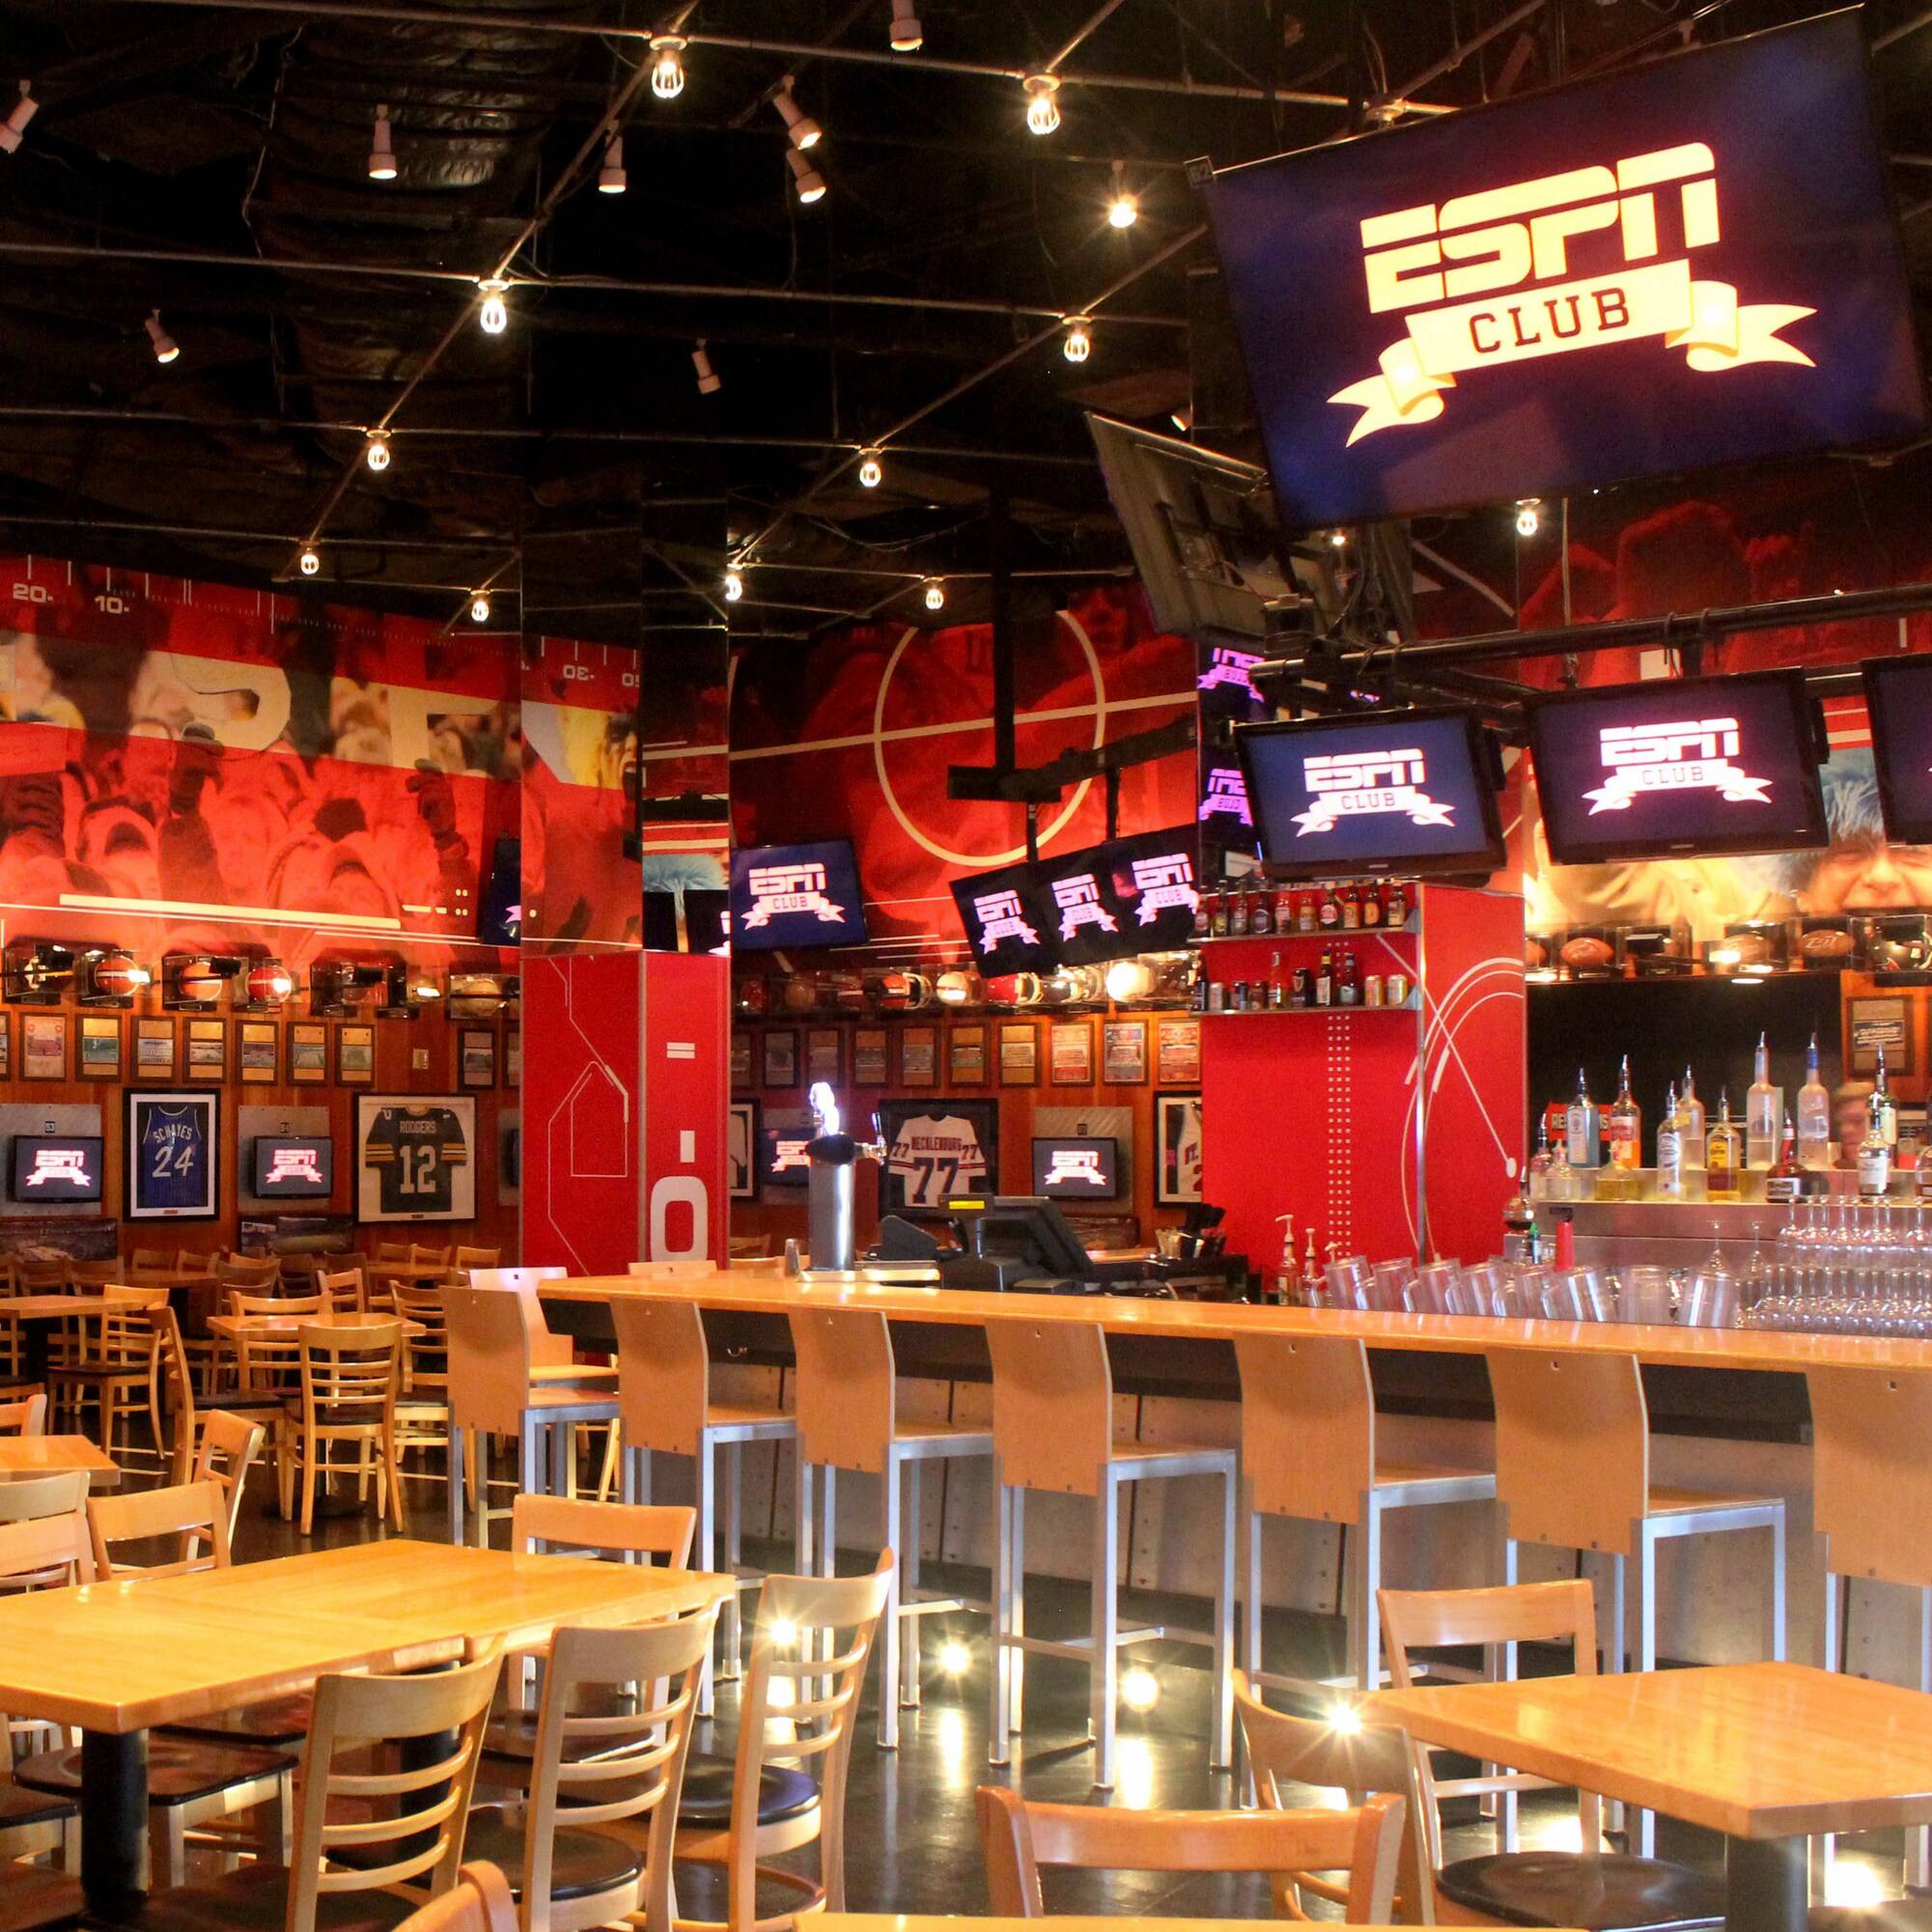 ESPN Club has not reopened since the COVID-19 shutdown